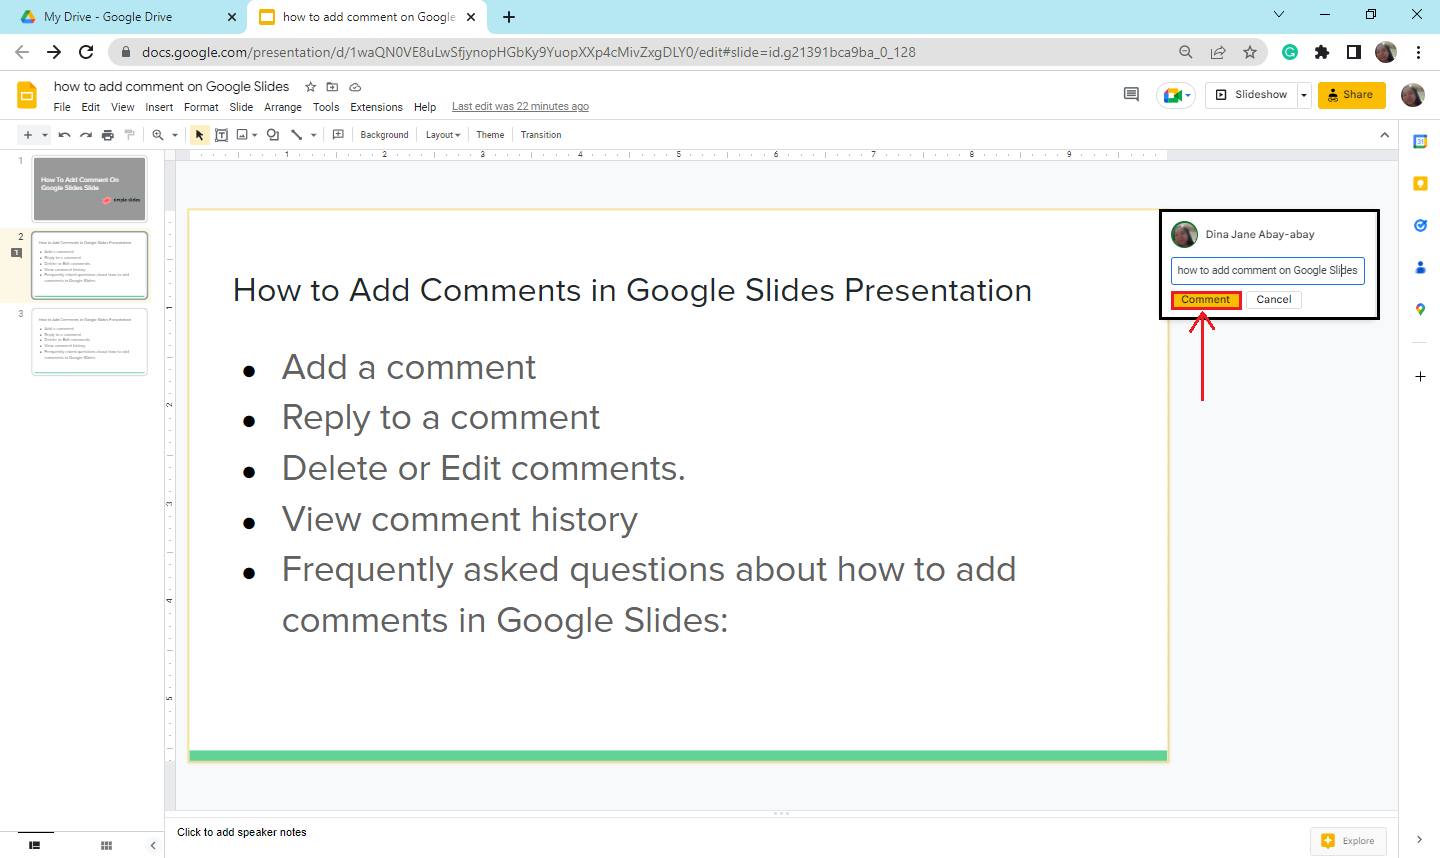 select the "comments" button in the pop-up box.